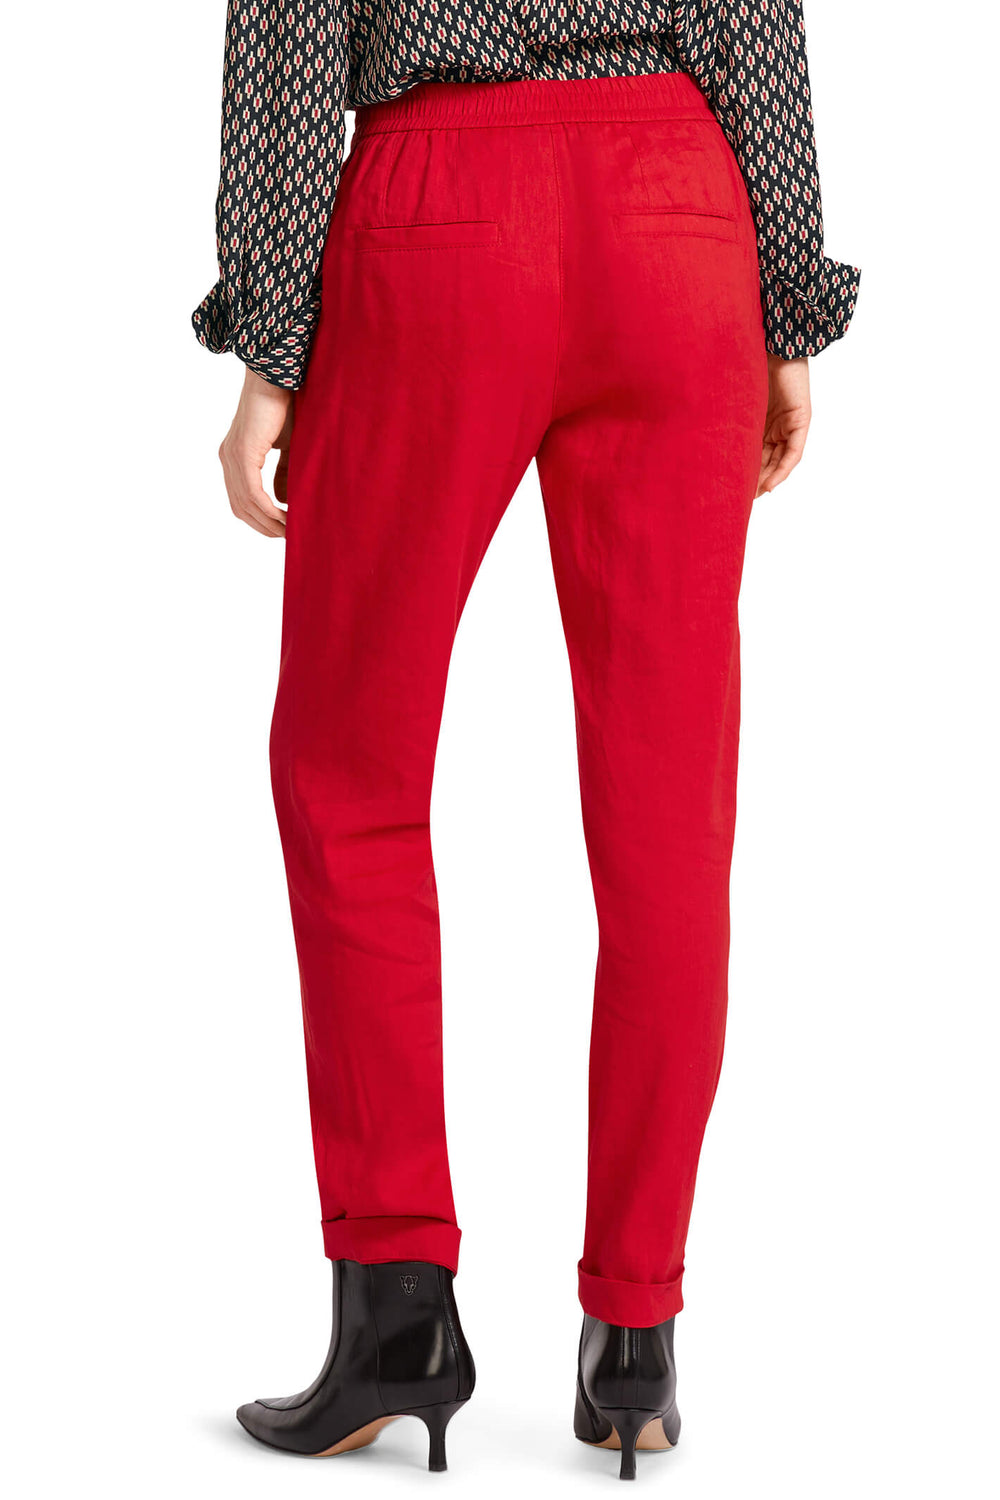 Marc Cain Collection UC 81.59 W47 Deep Red Vacation Vibes Trousers - Olivia Grace Fashion